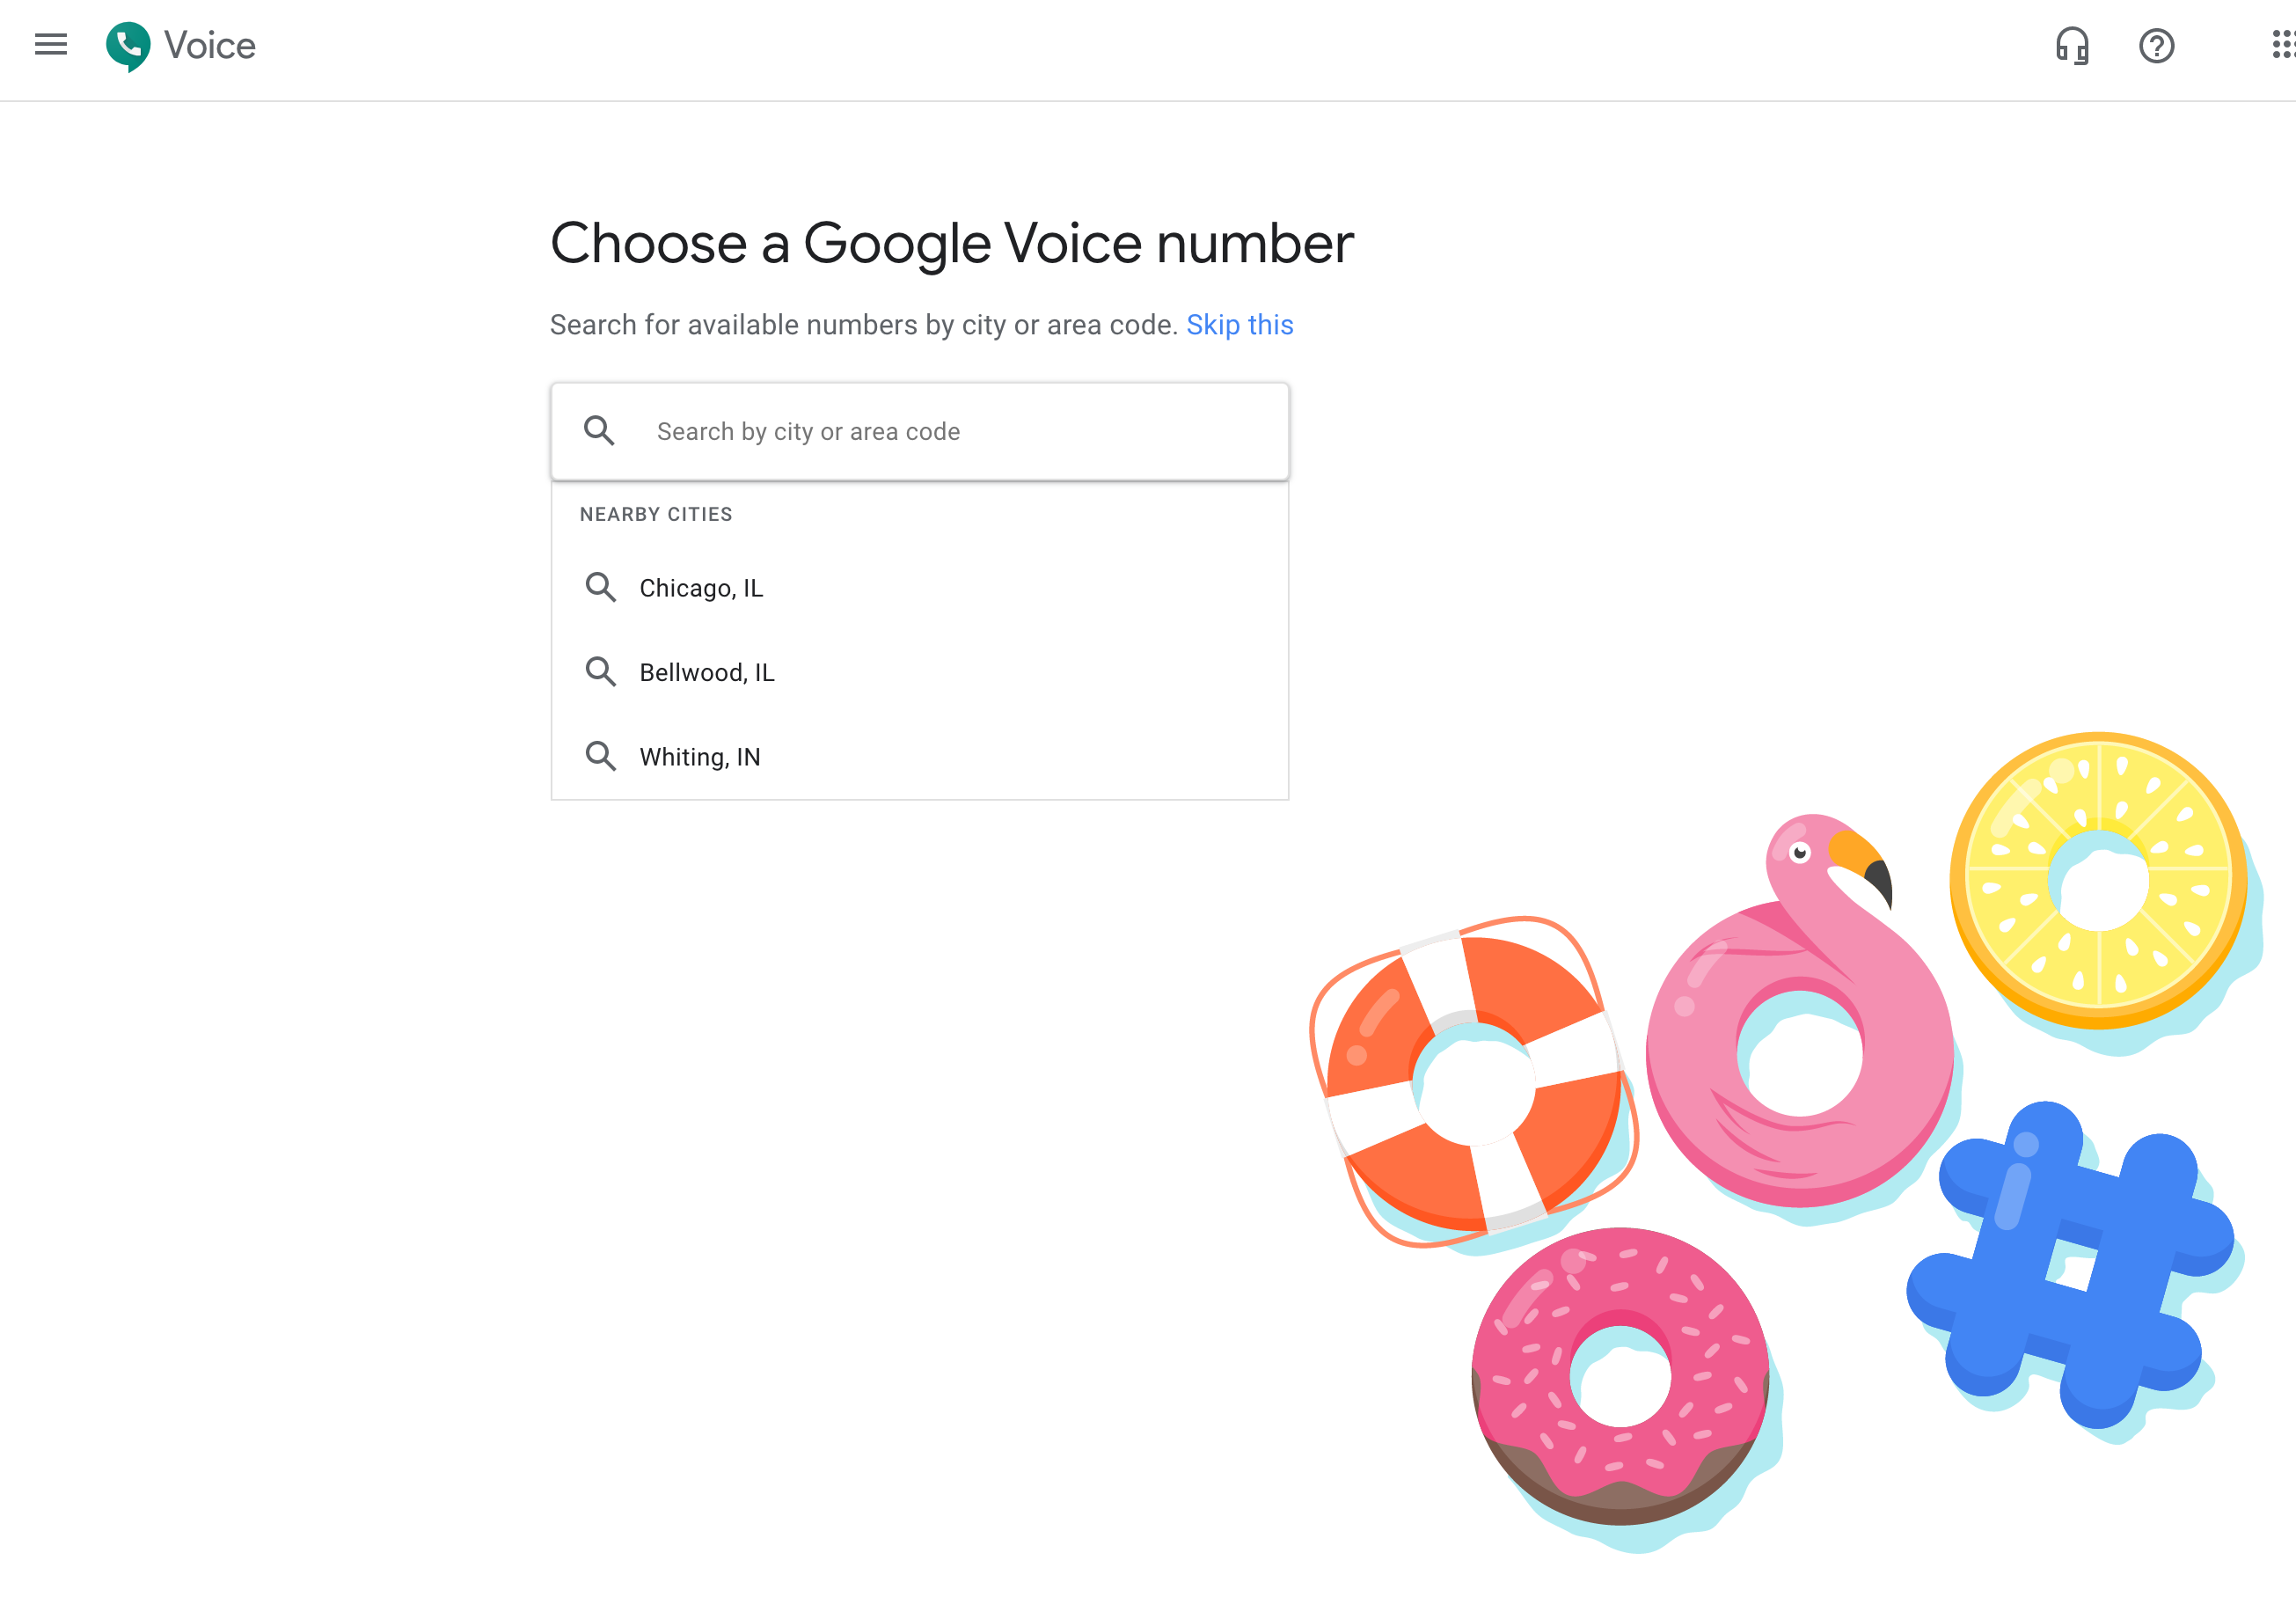 ways to use google voice for mac